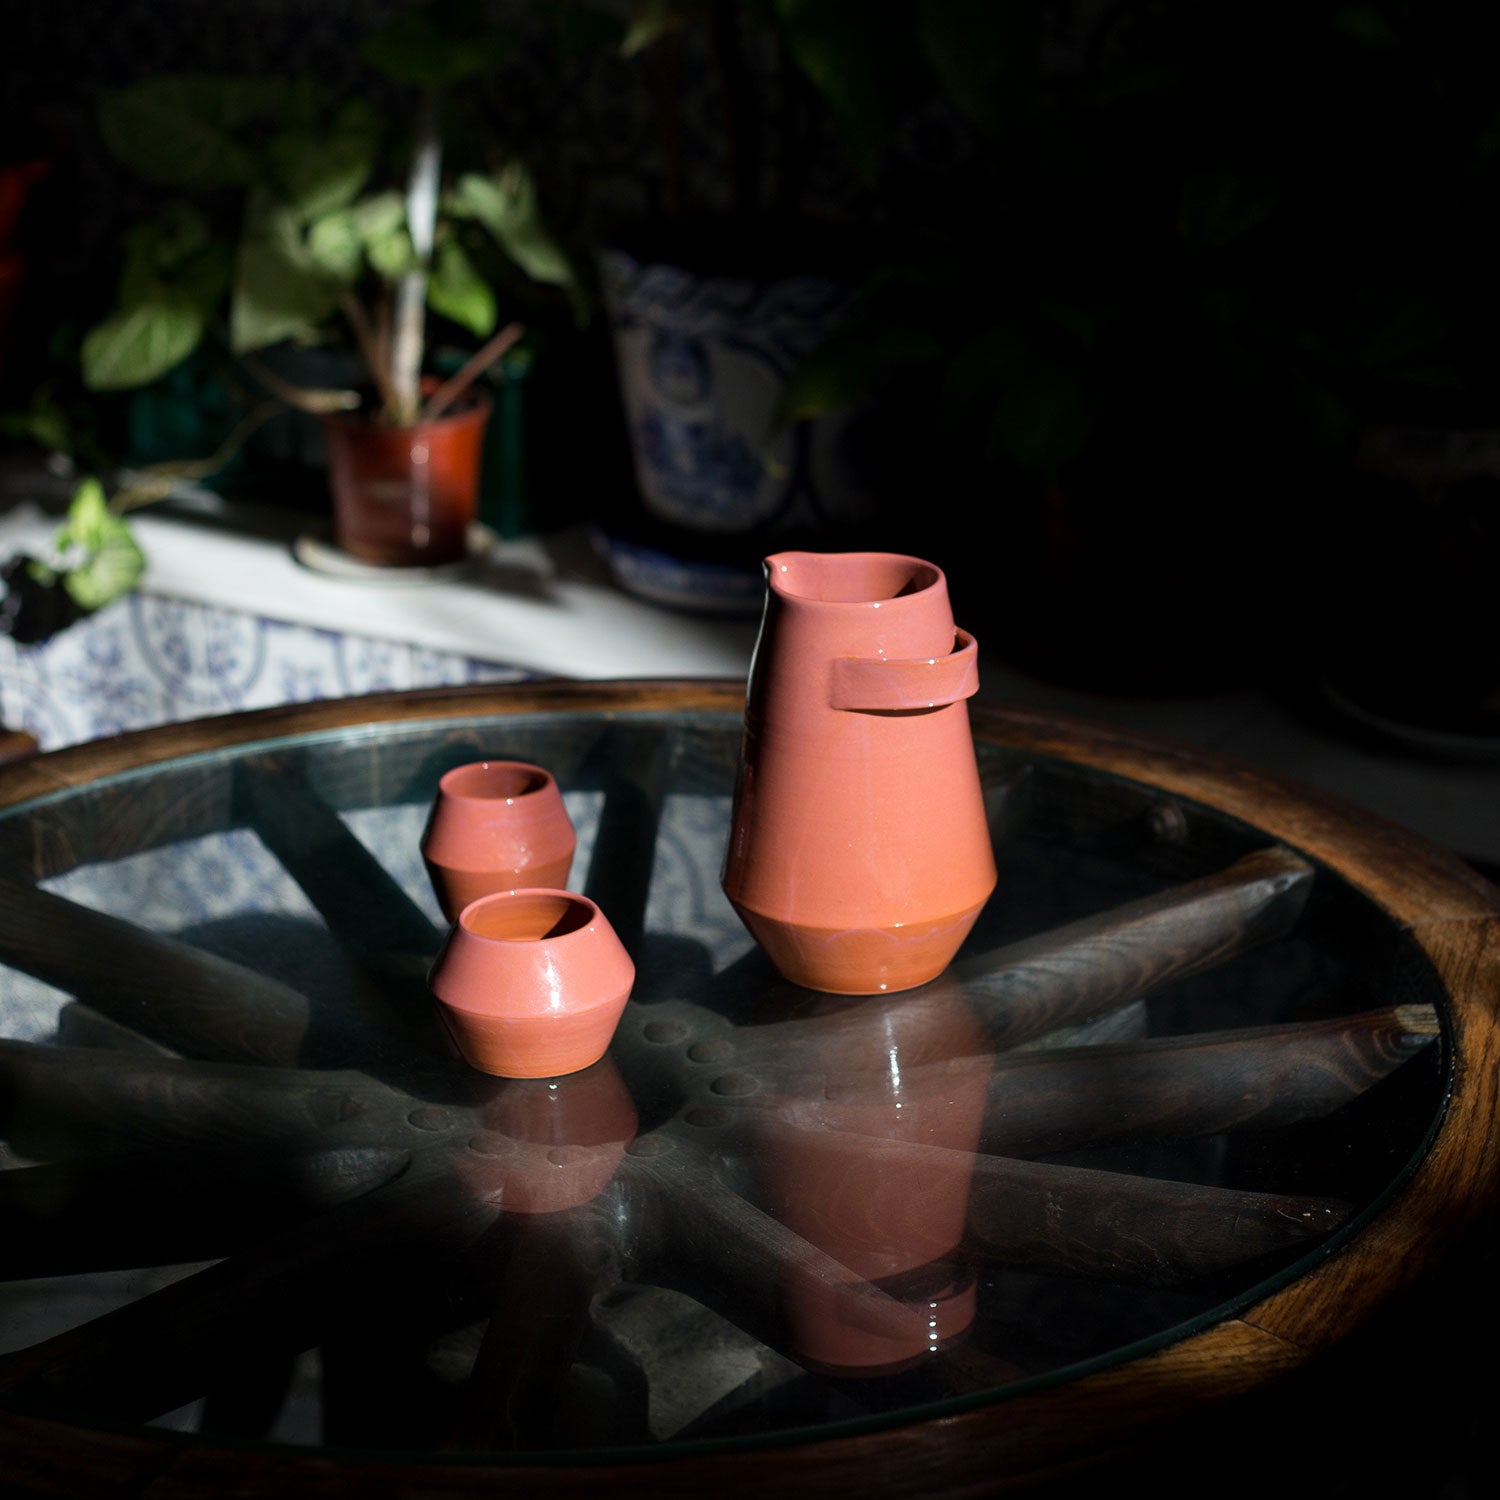 Cachopo cups and pitcher are terracotta pieces designed by Mariana Filipe for Tasco collection by Vicara